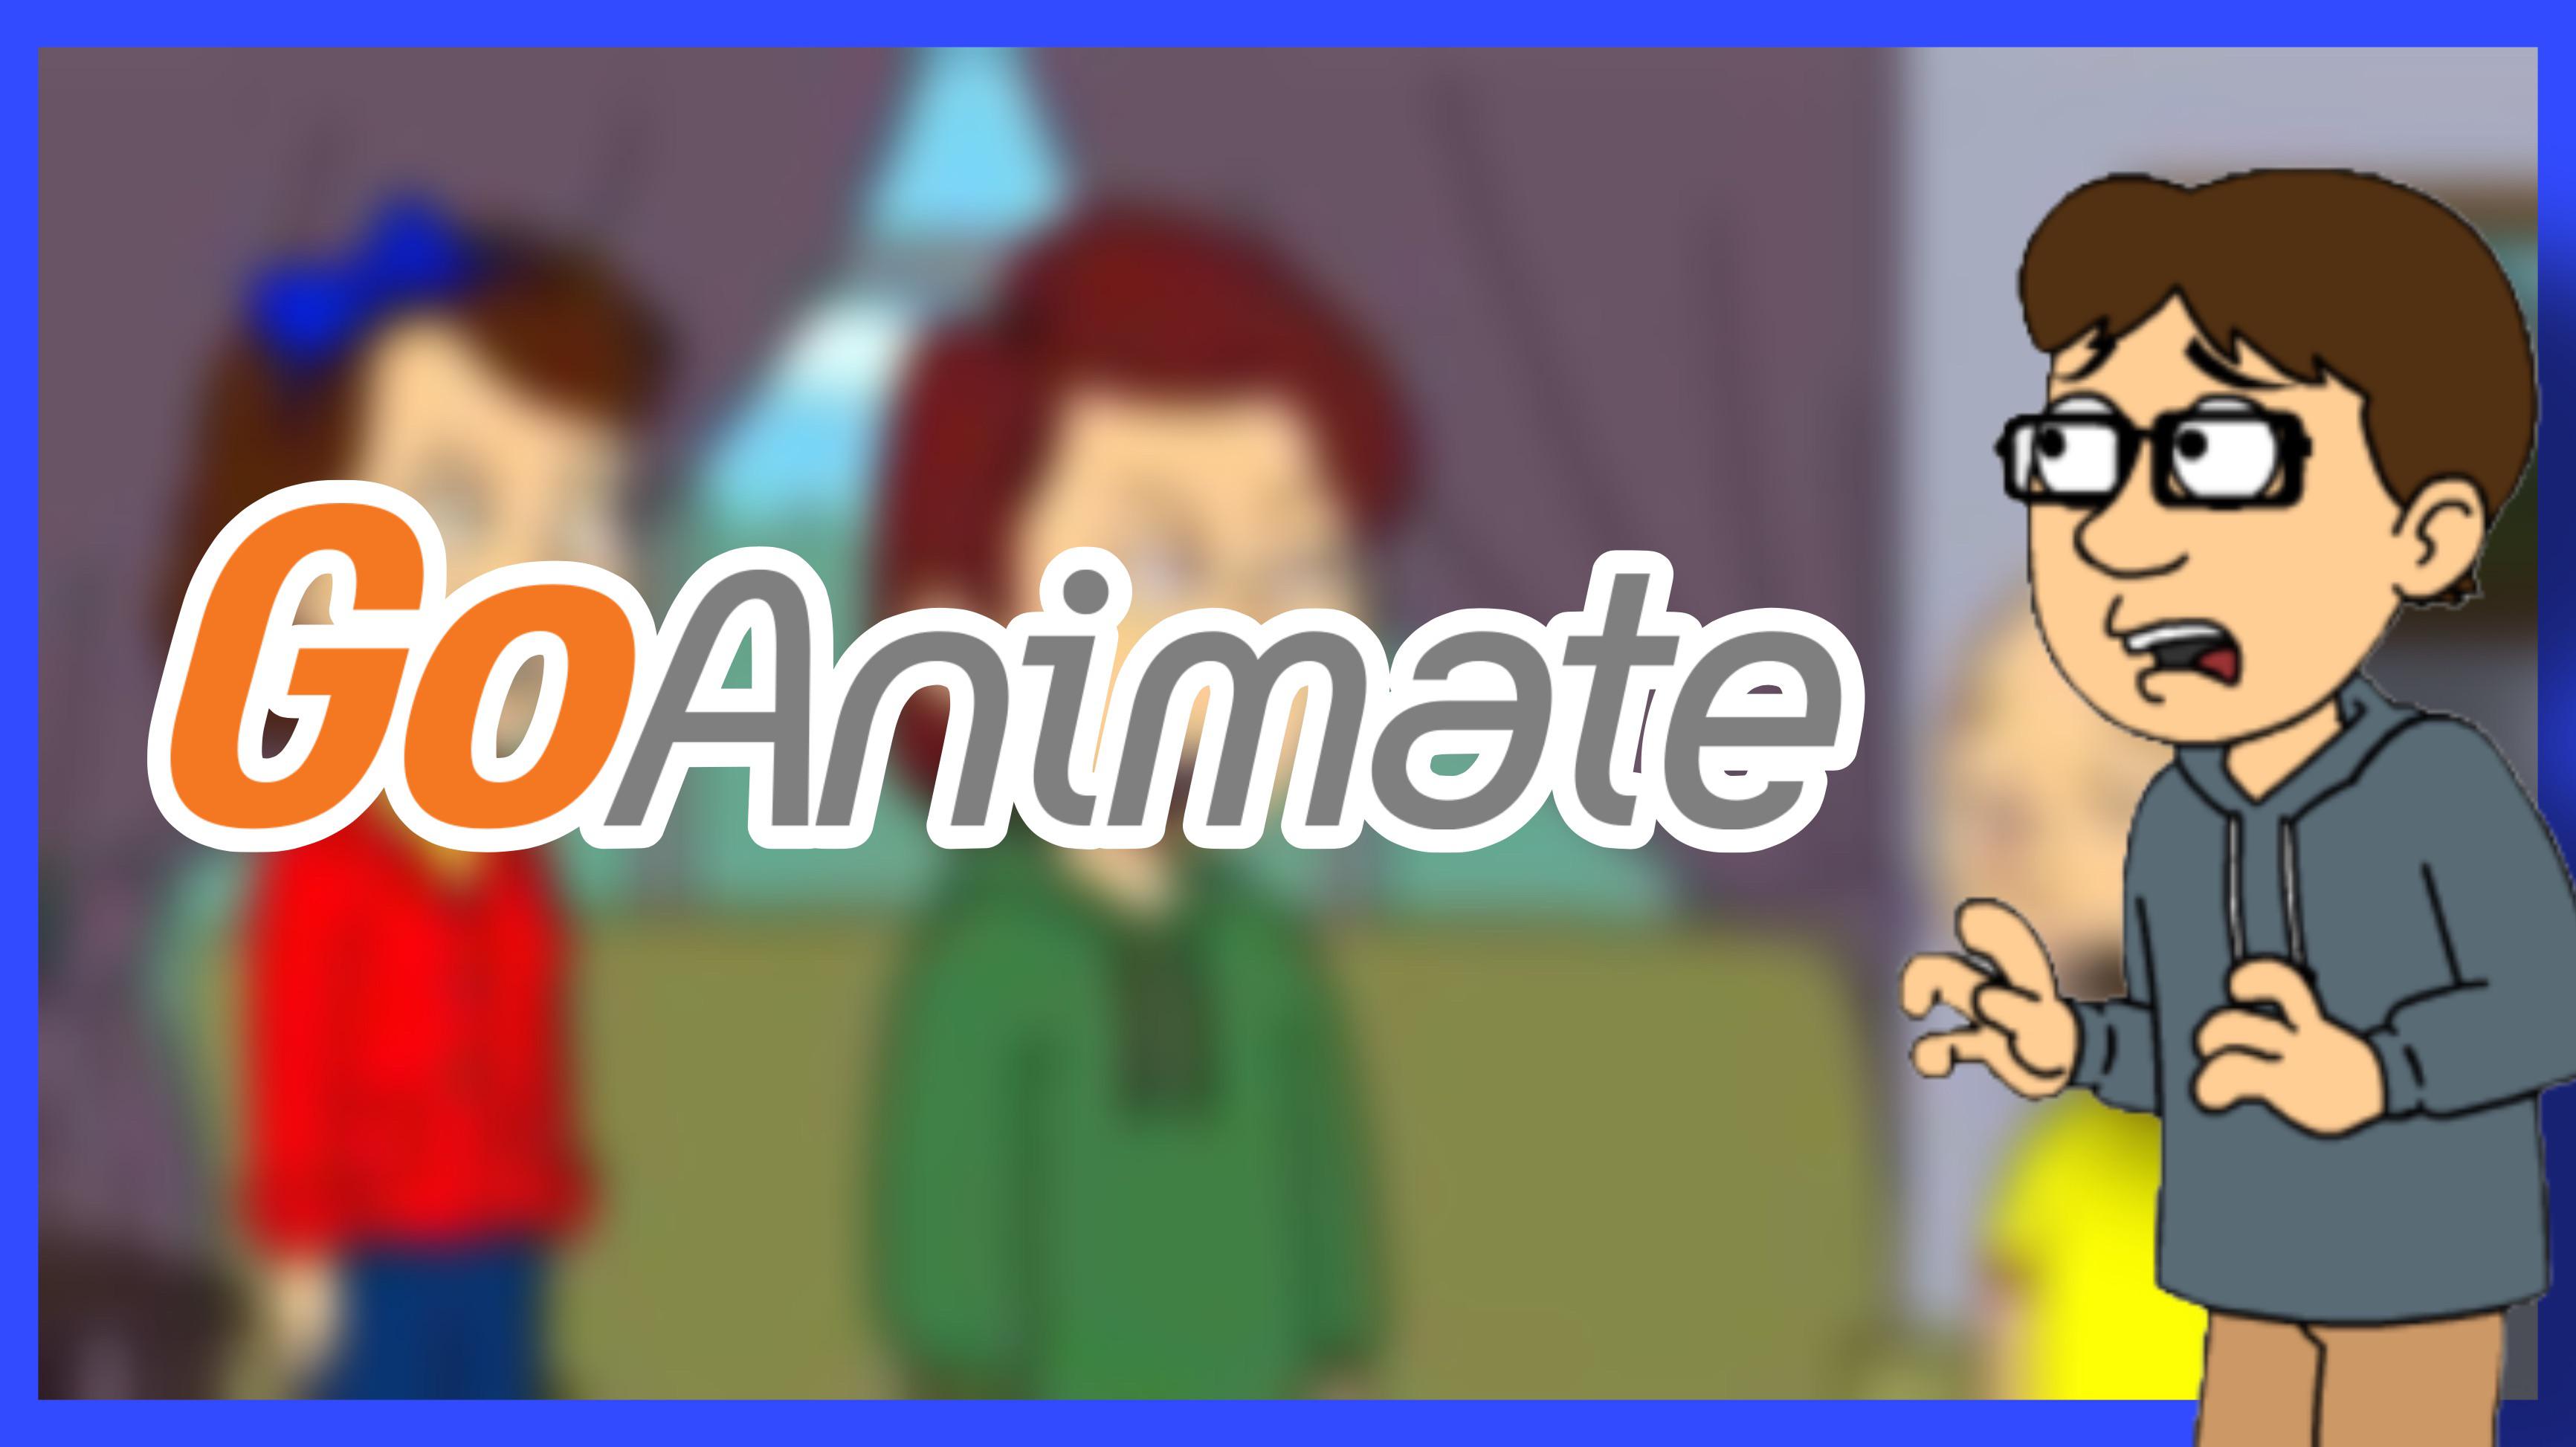 How To Download Goanimate Videos